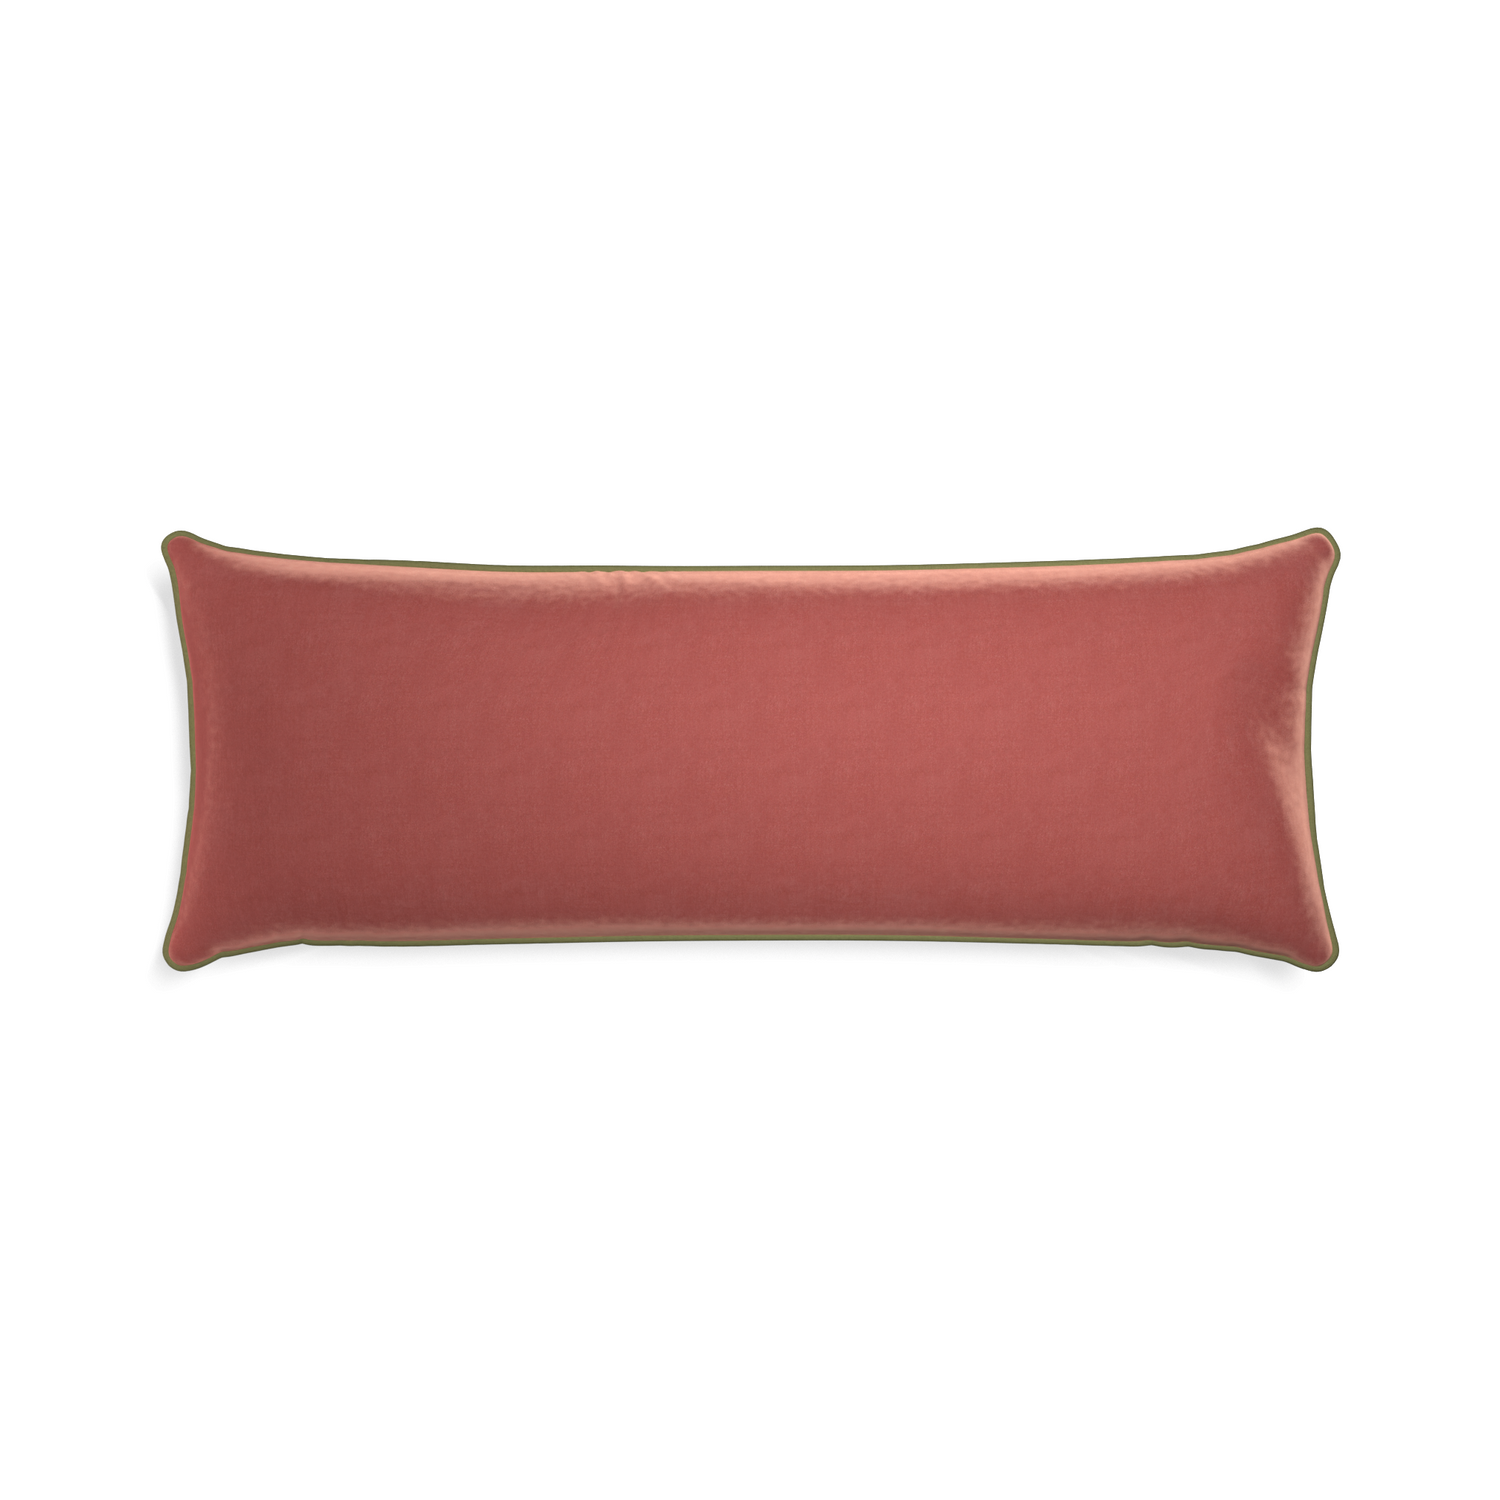 Xl-lumbar cosmo velvet custom pillow with moss piping on white background